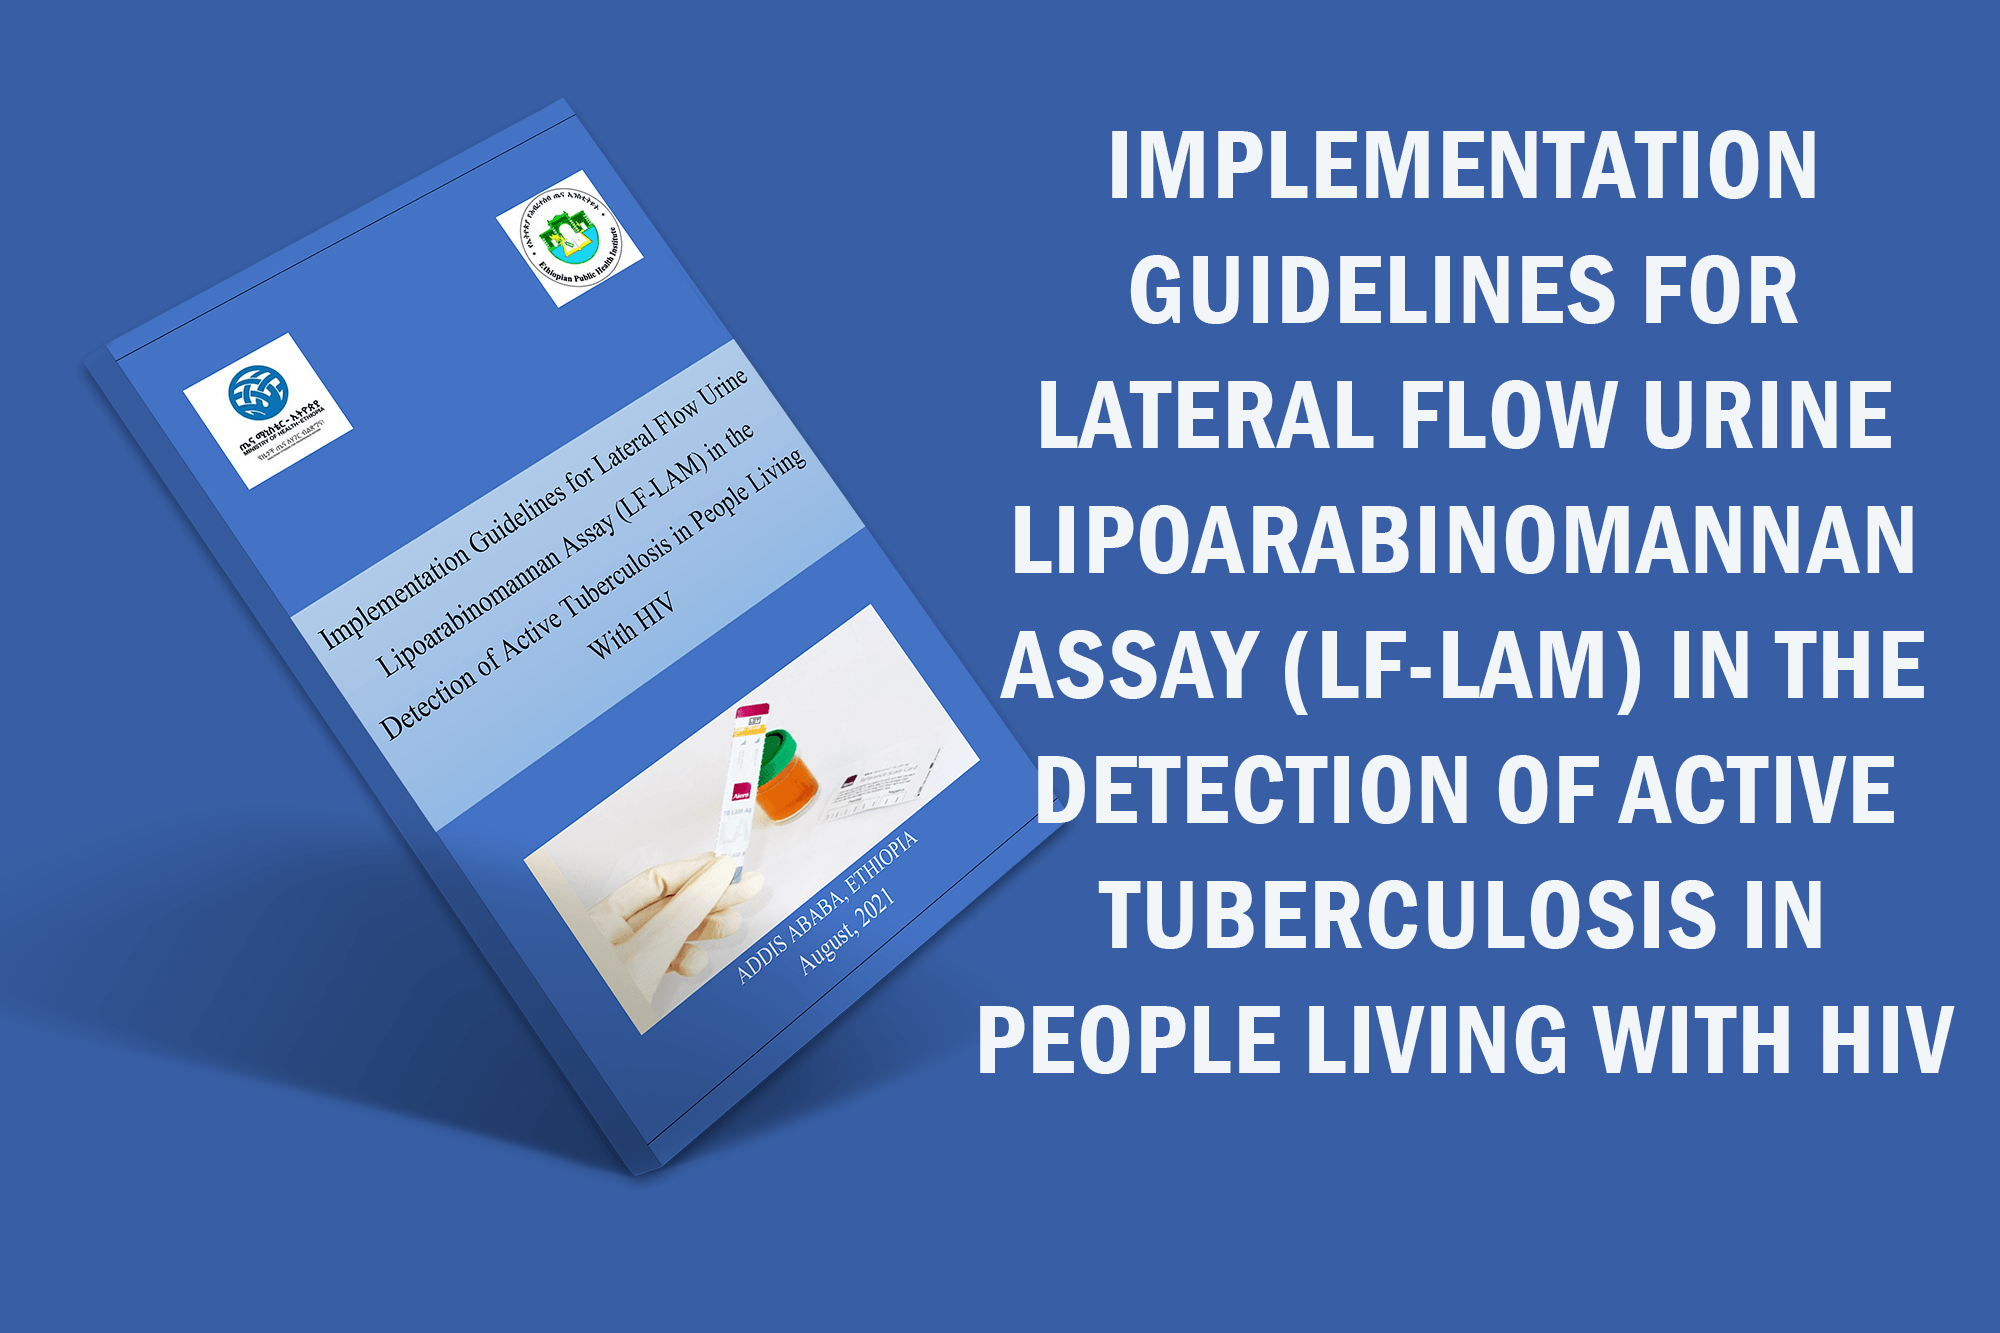 Implementation Guidelines for Lateral Flow Urine Lipoarabinomannan Assay (LF-LAM) in the Detection of Active Tuberculosis in People Living With HIV